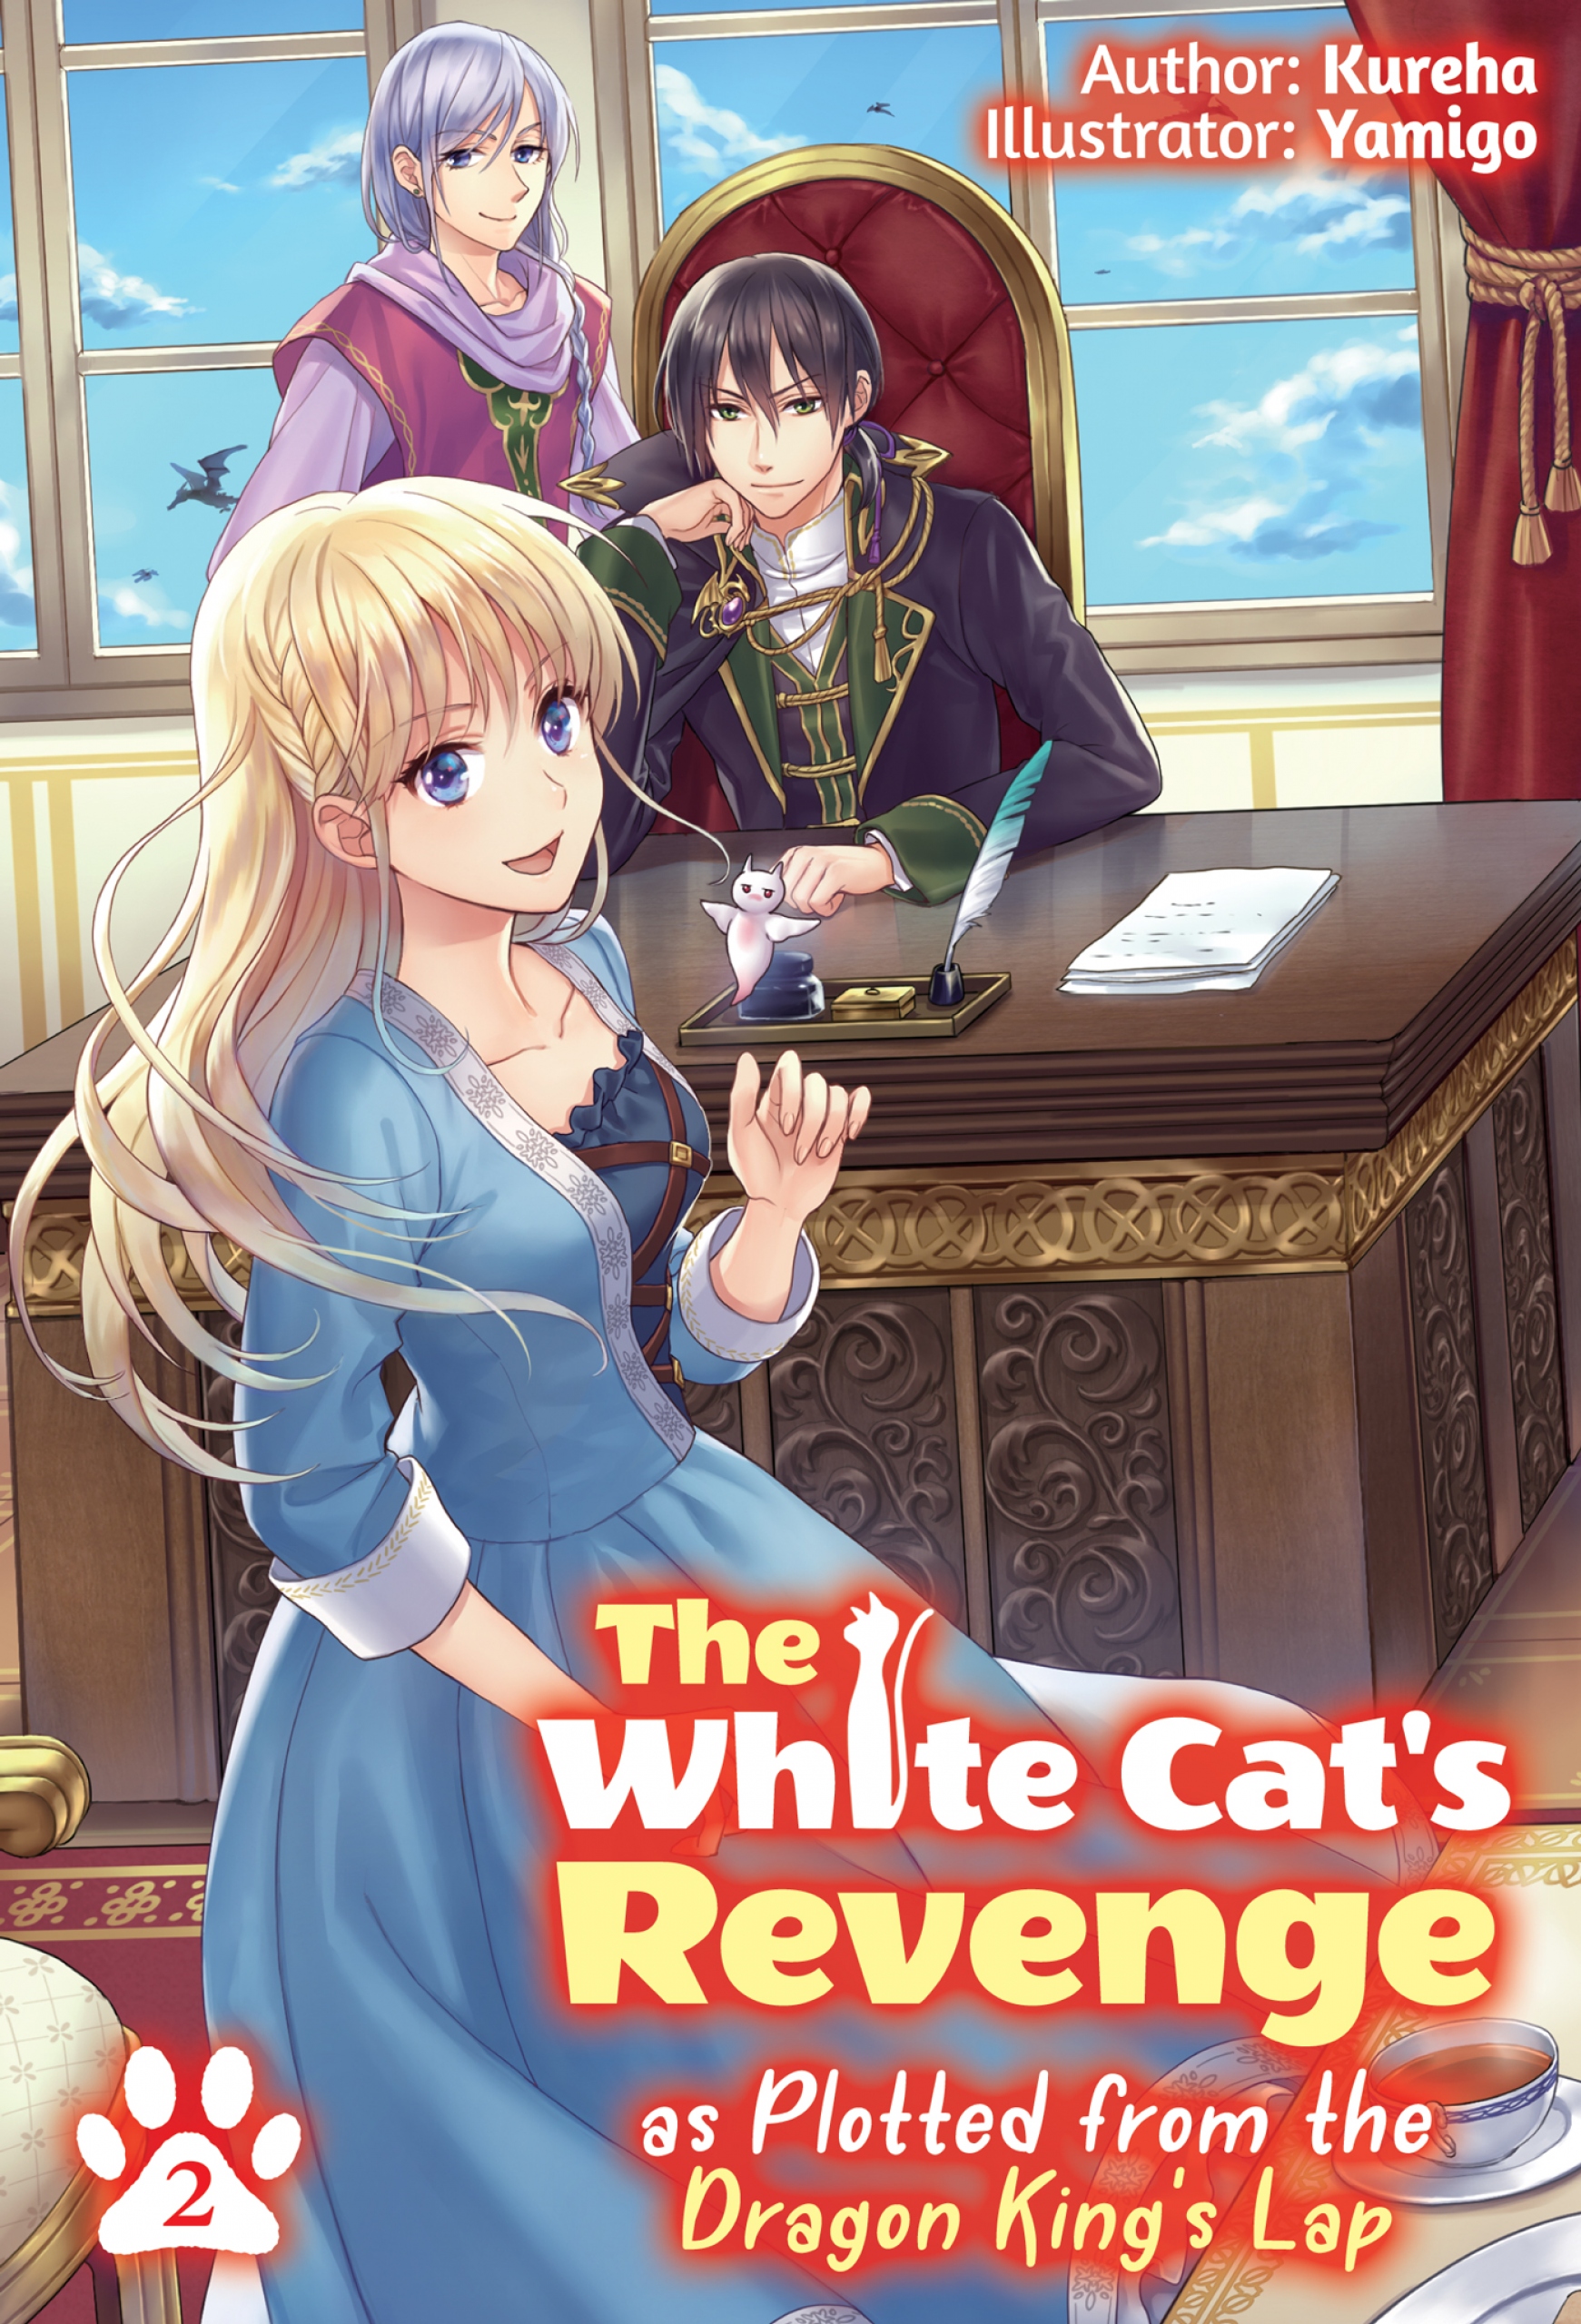 The White Cat"s Revenge as Plotted from the Dragon King"s Lap: Volume 2